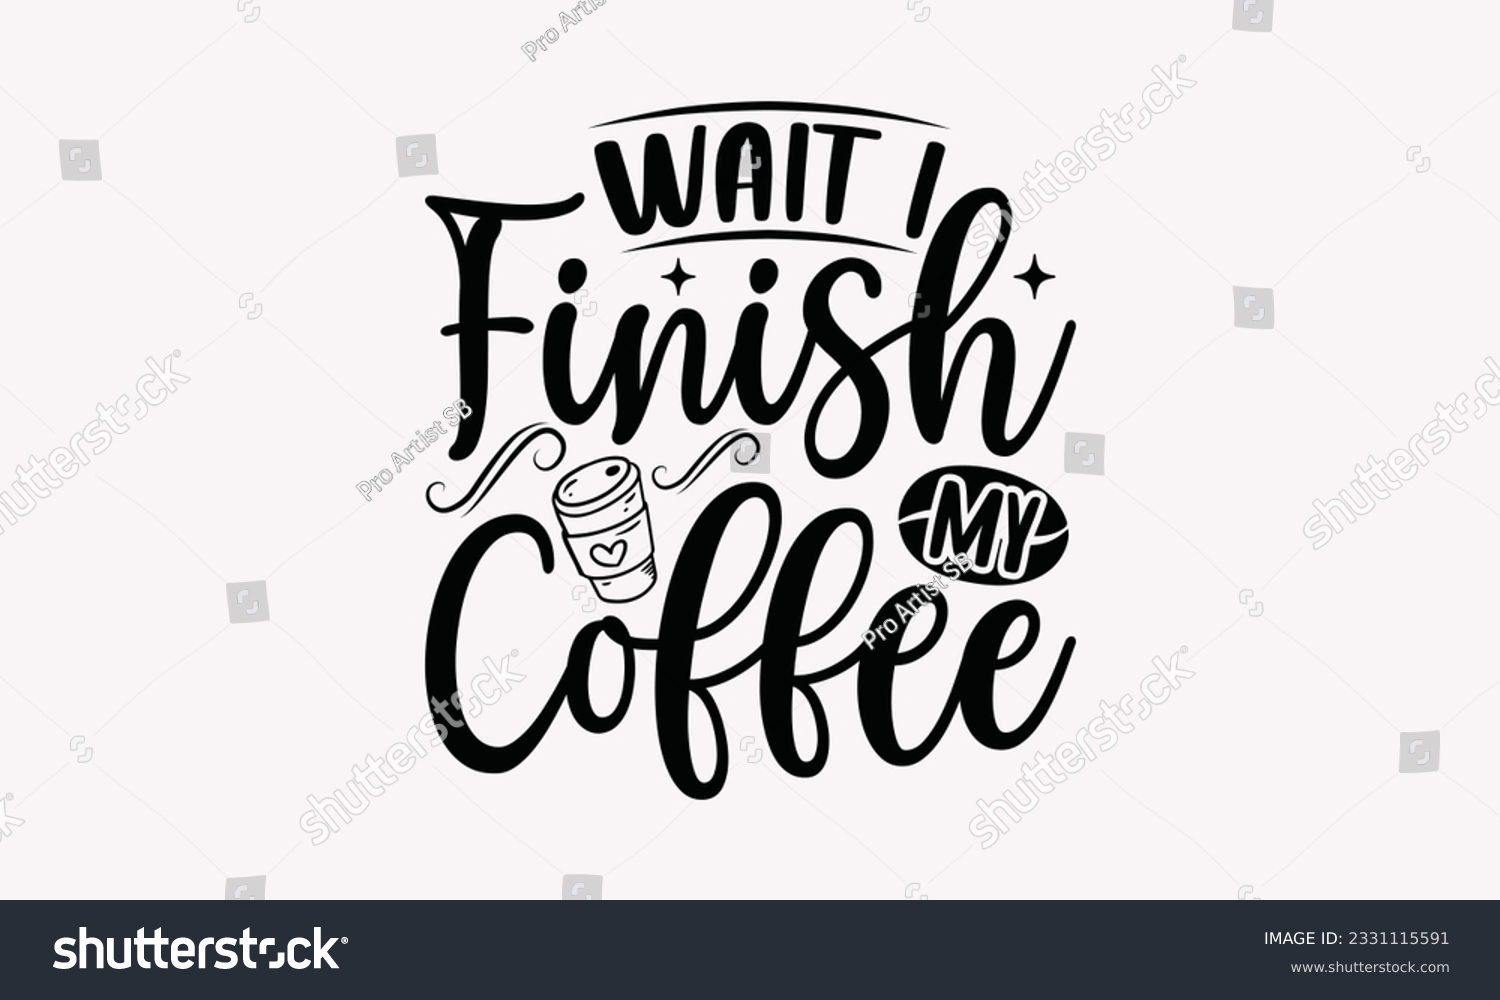 SVG of Wait until I finish my coffee - Coffee SVG Design Template, Cheer Quotes, Hand drawn lettering phrase, Isolated on white background. svg